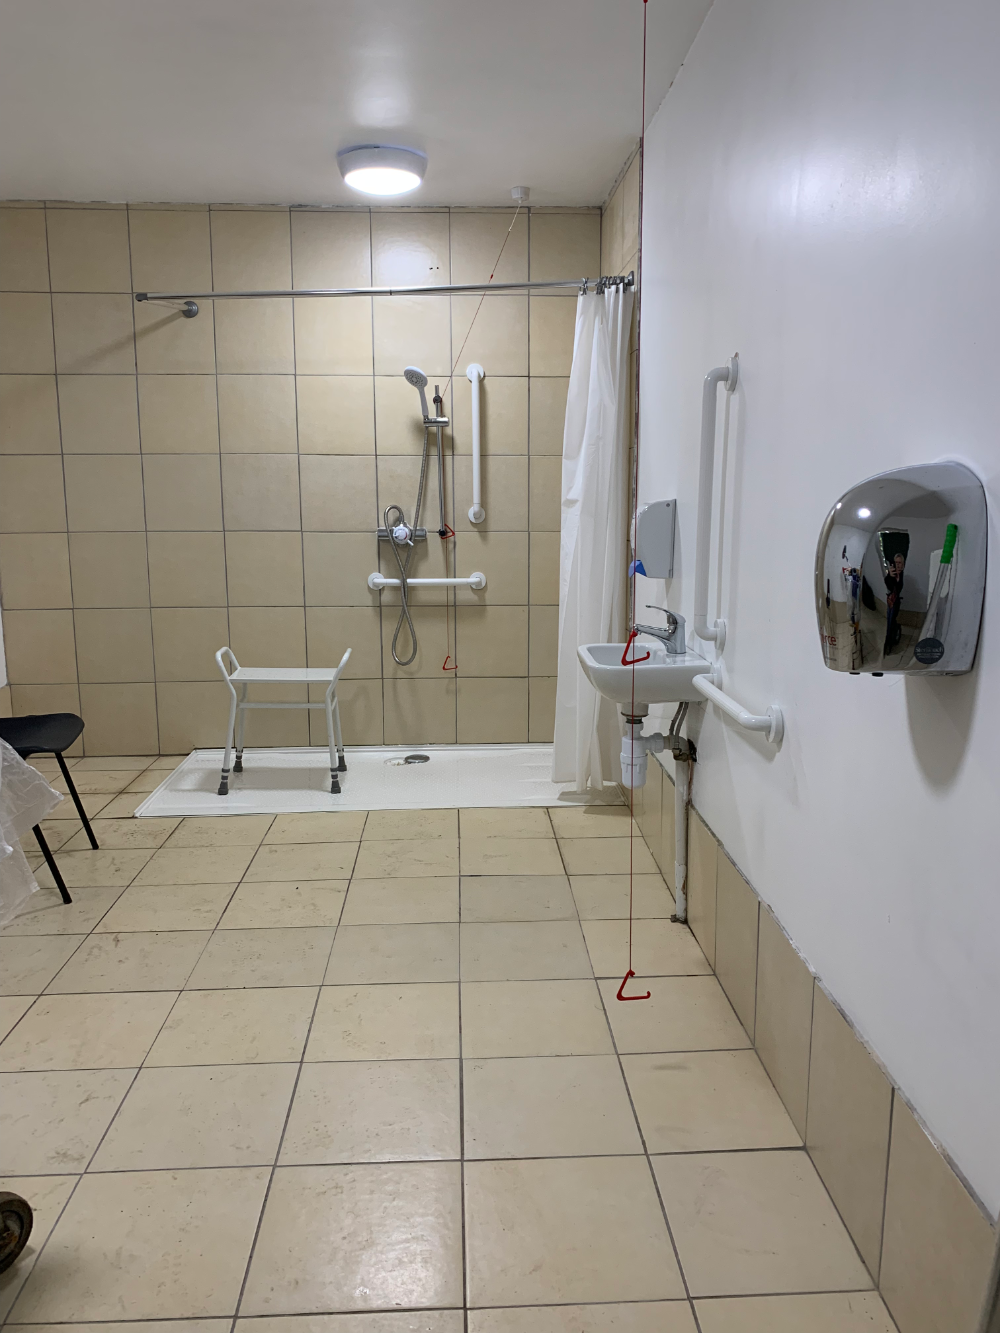 Photo of the accessible shower room with level access to the shower, a shower stool, sink, hand drier and several grab rails